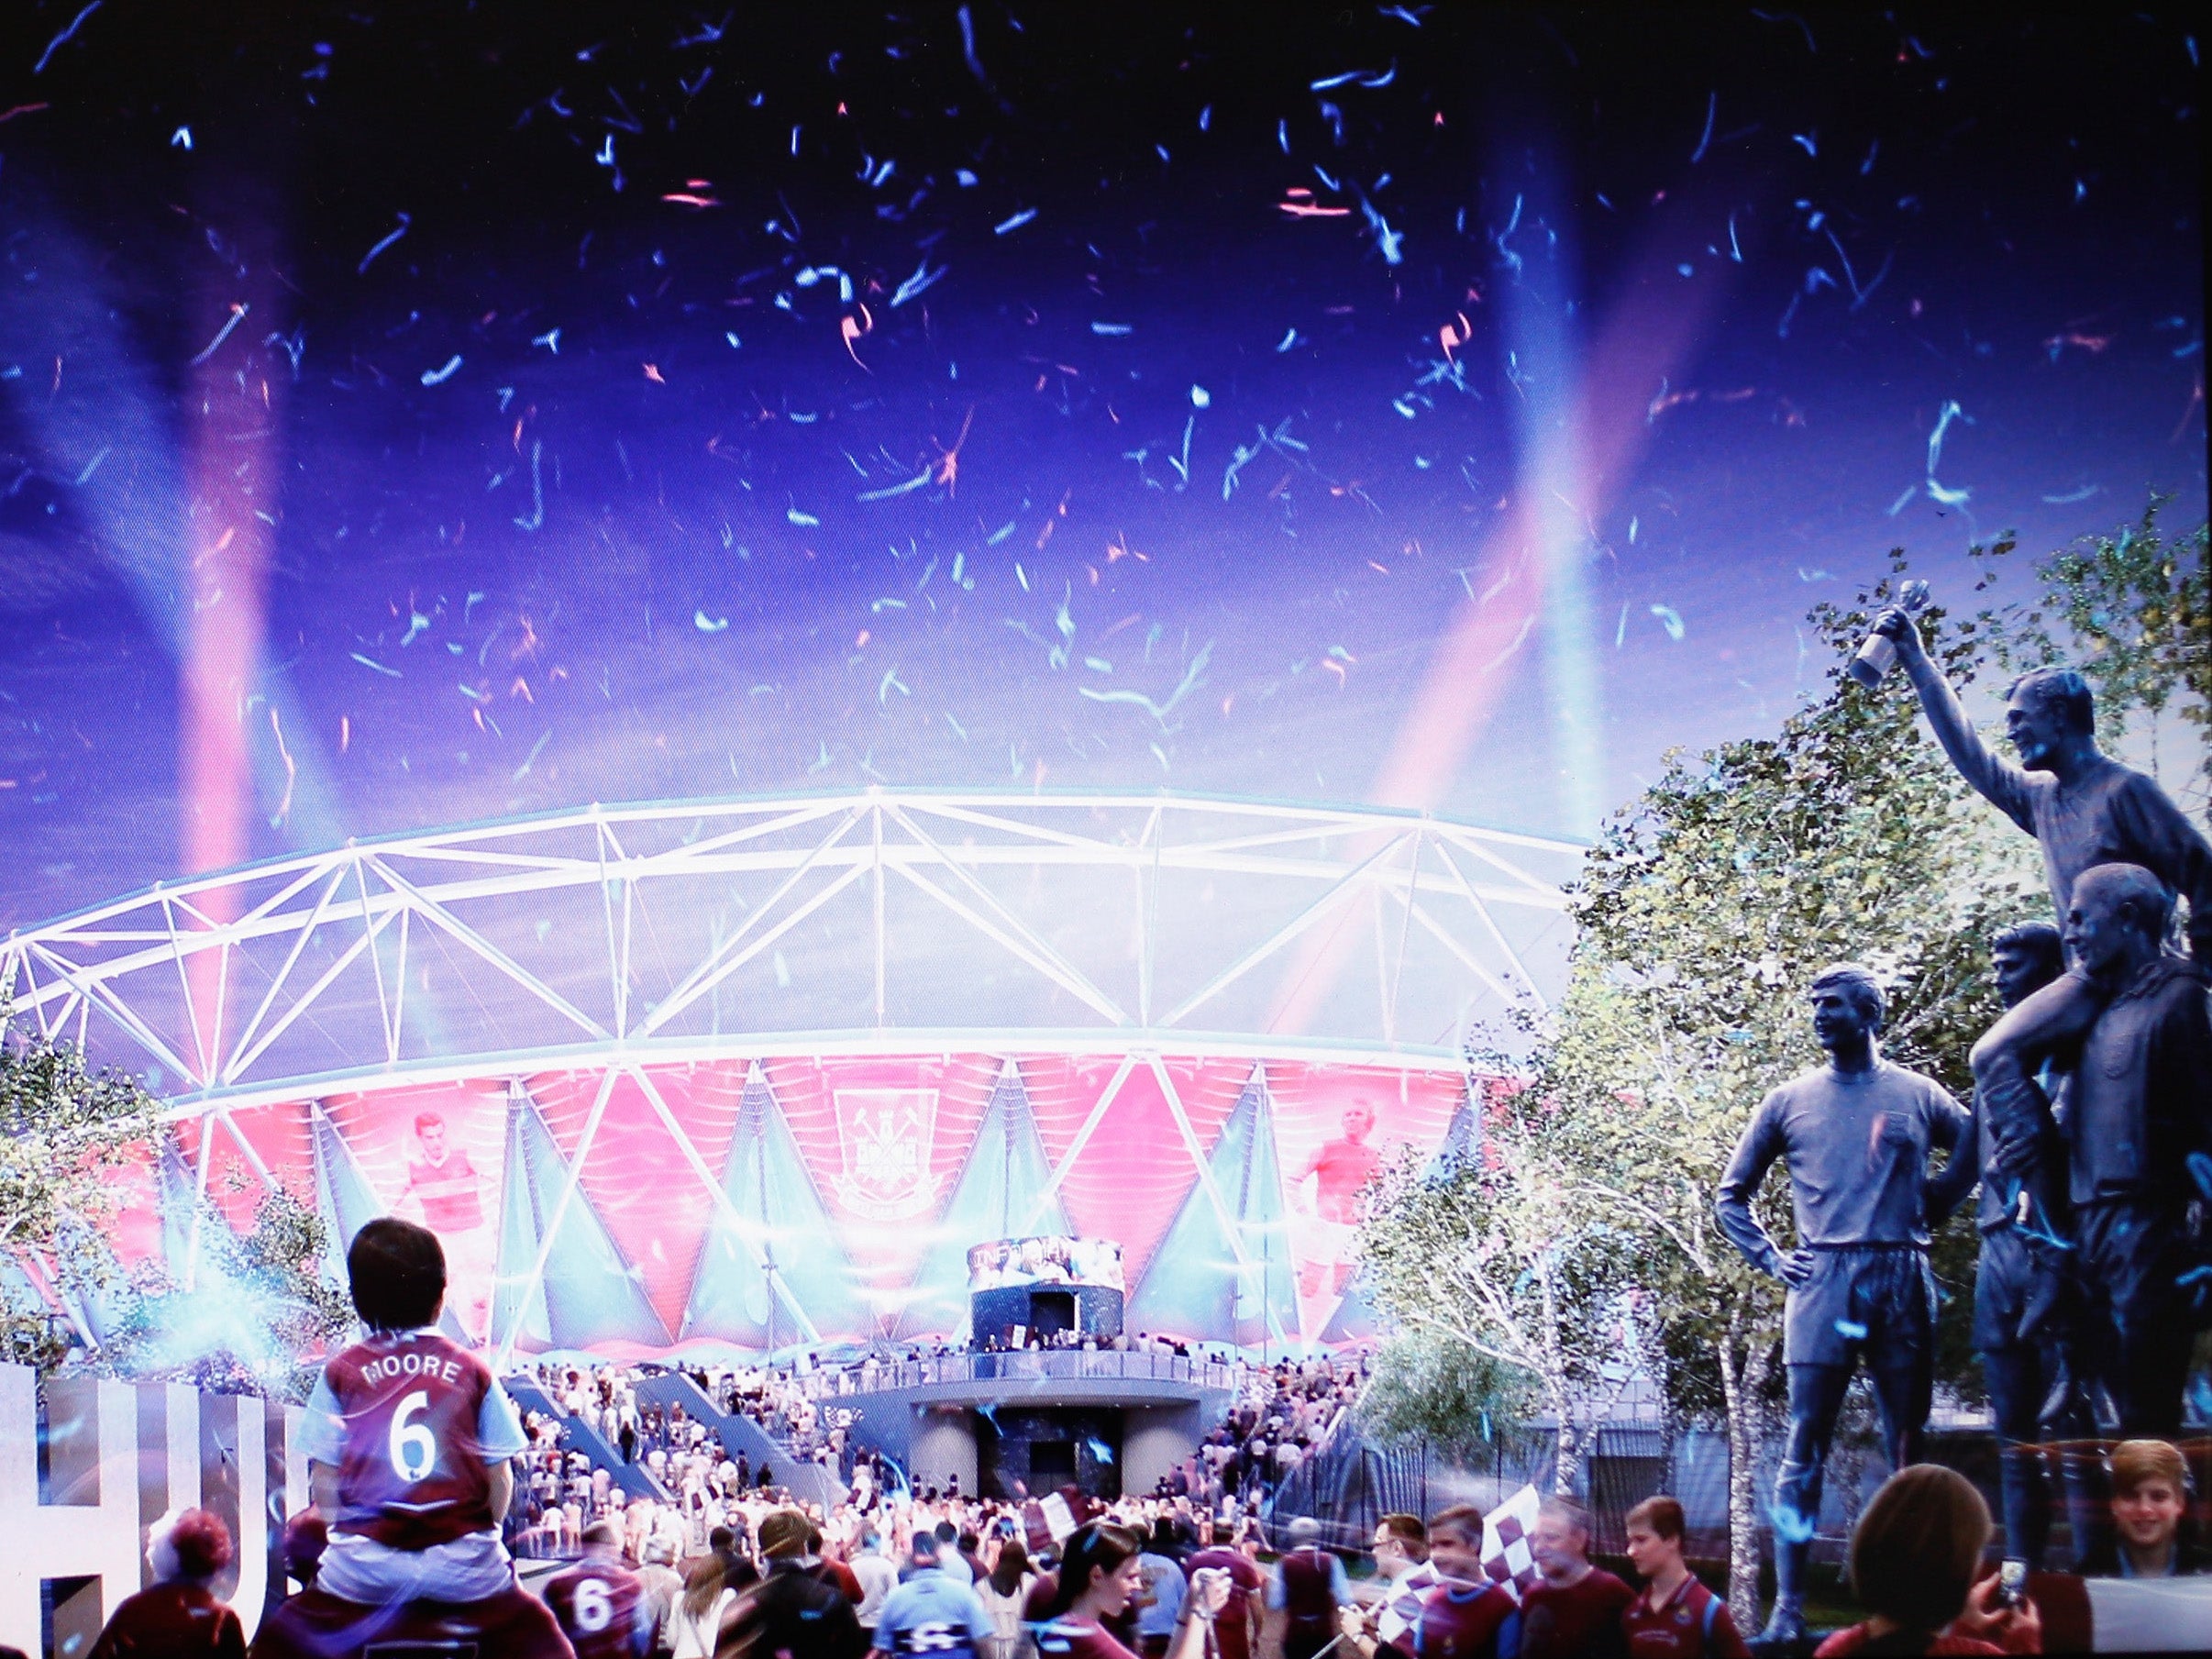 An artists' impression of West Ham United's new home